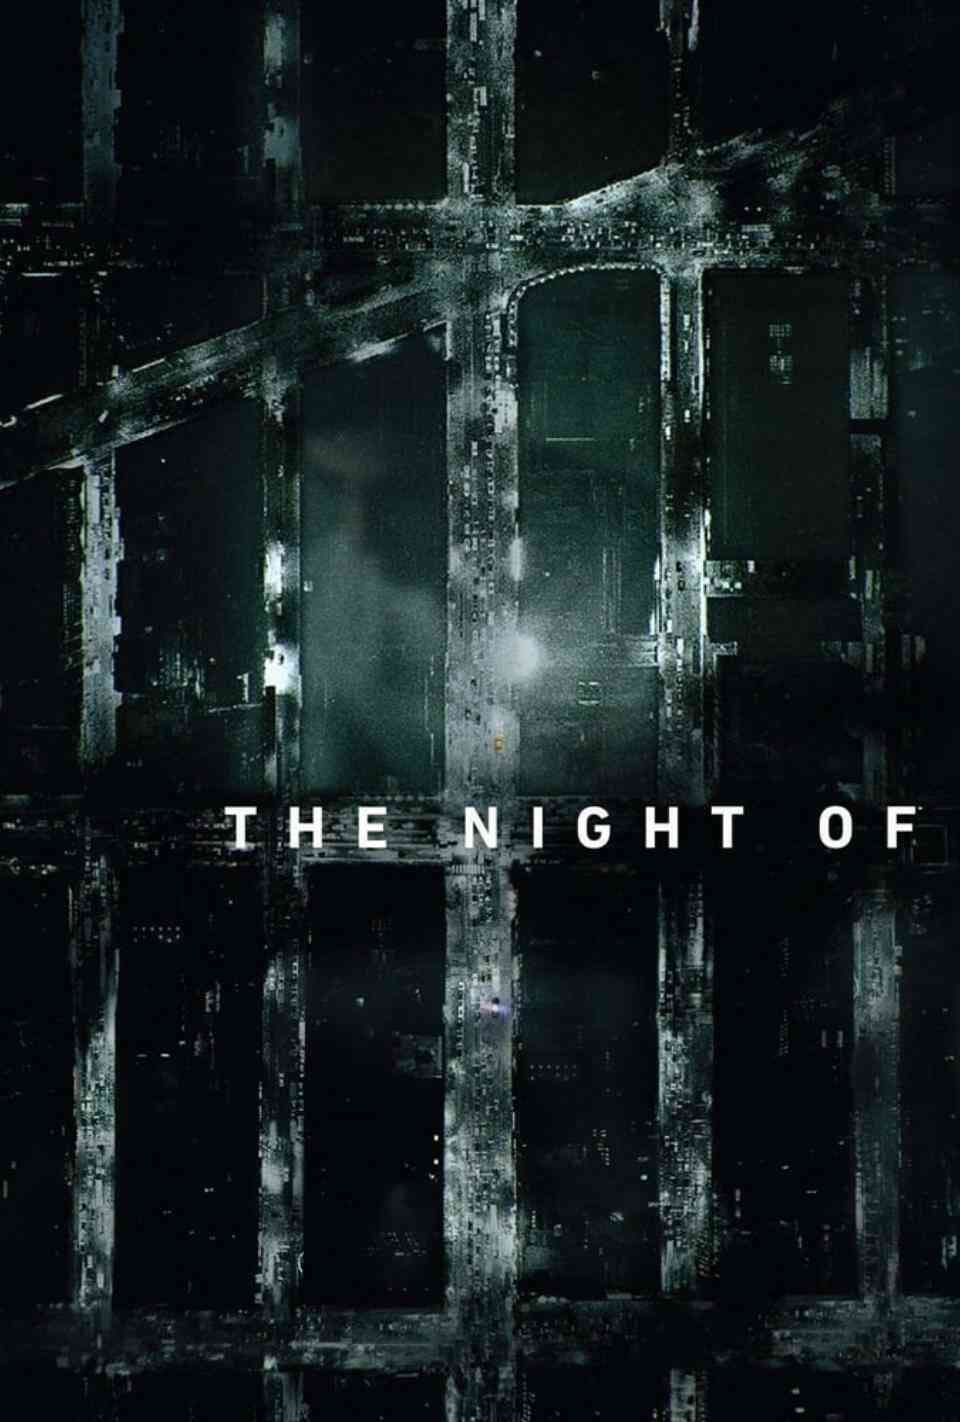 Read The Night Of screenplay (poster)